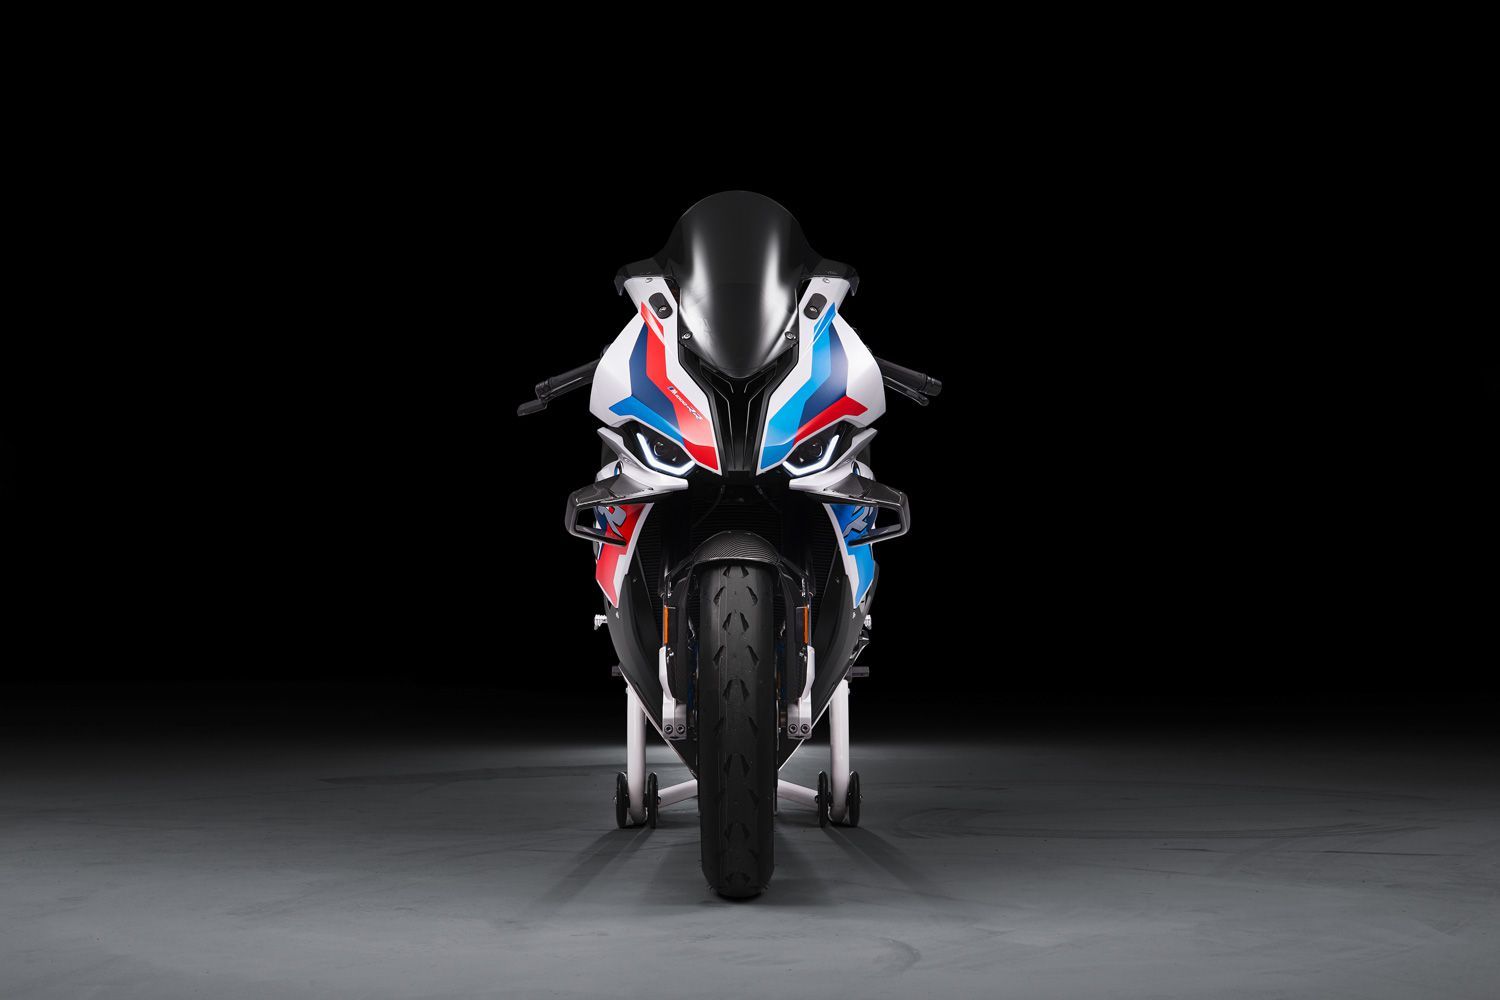 BMW S1000RR [16] wallpaper - Motorcycle wallpapers - #40634